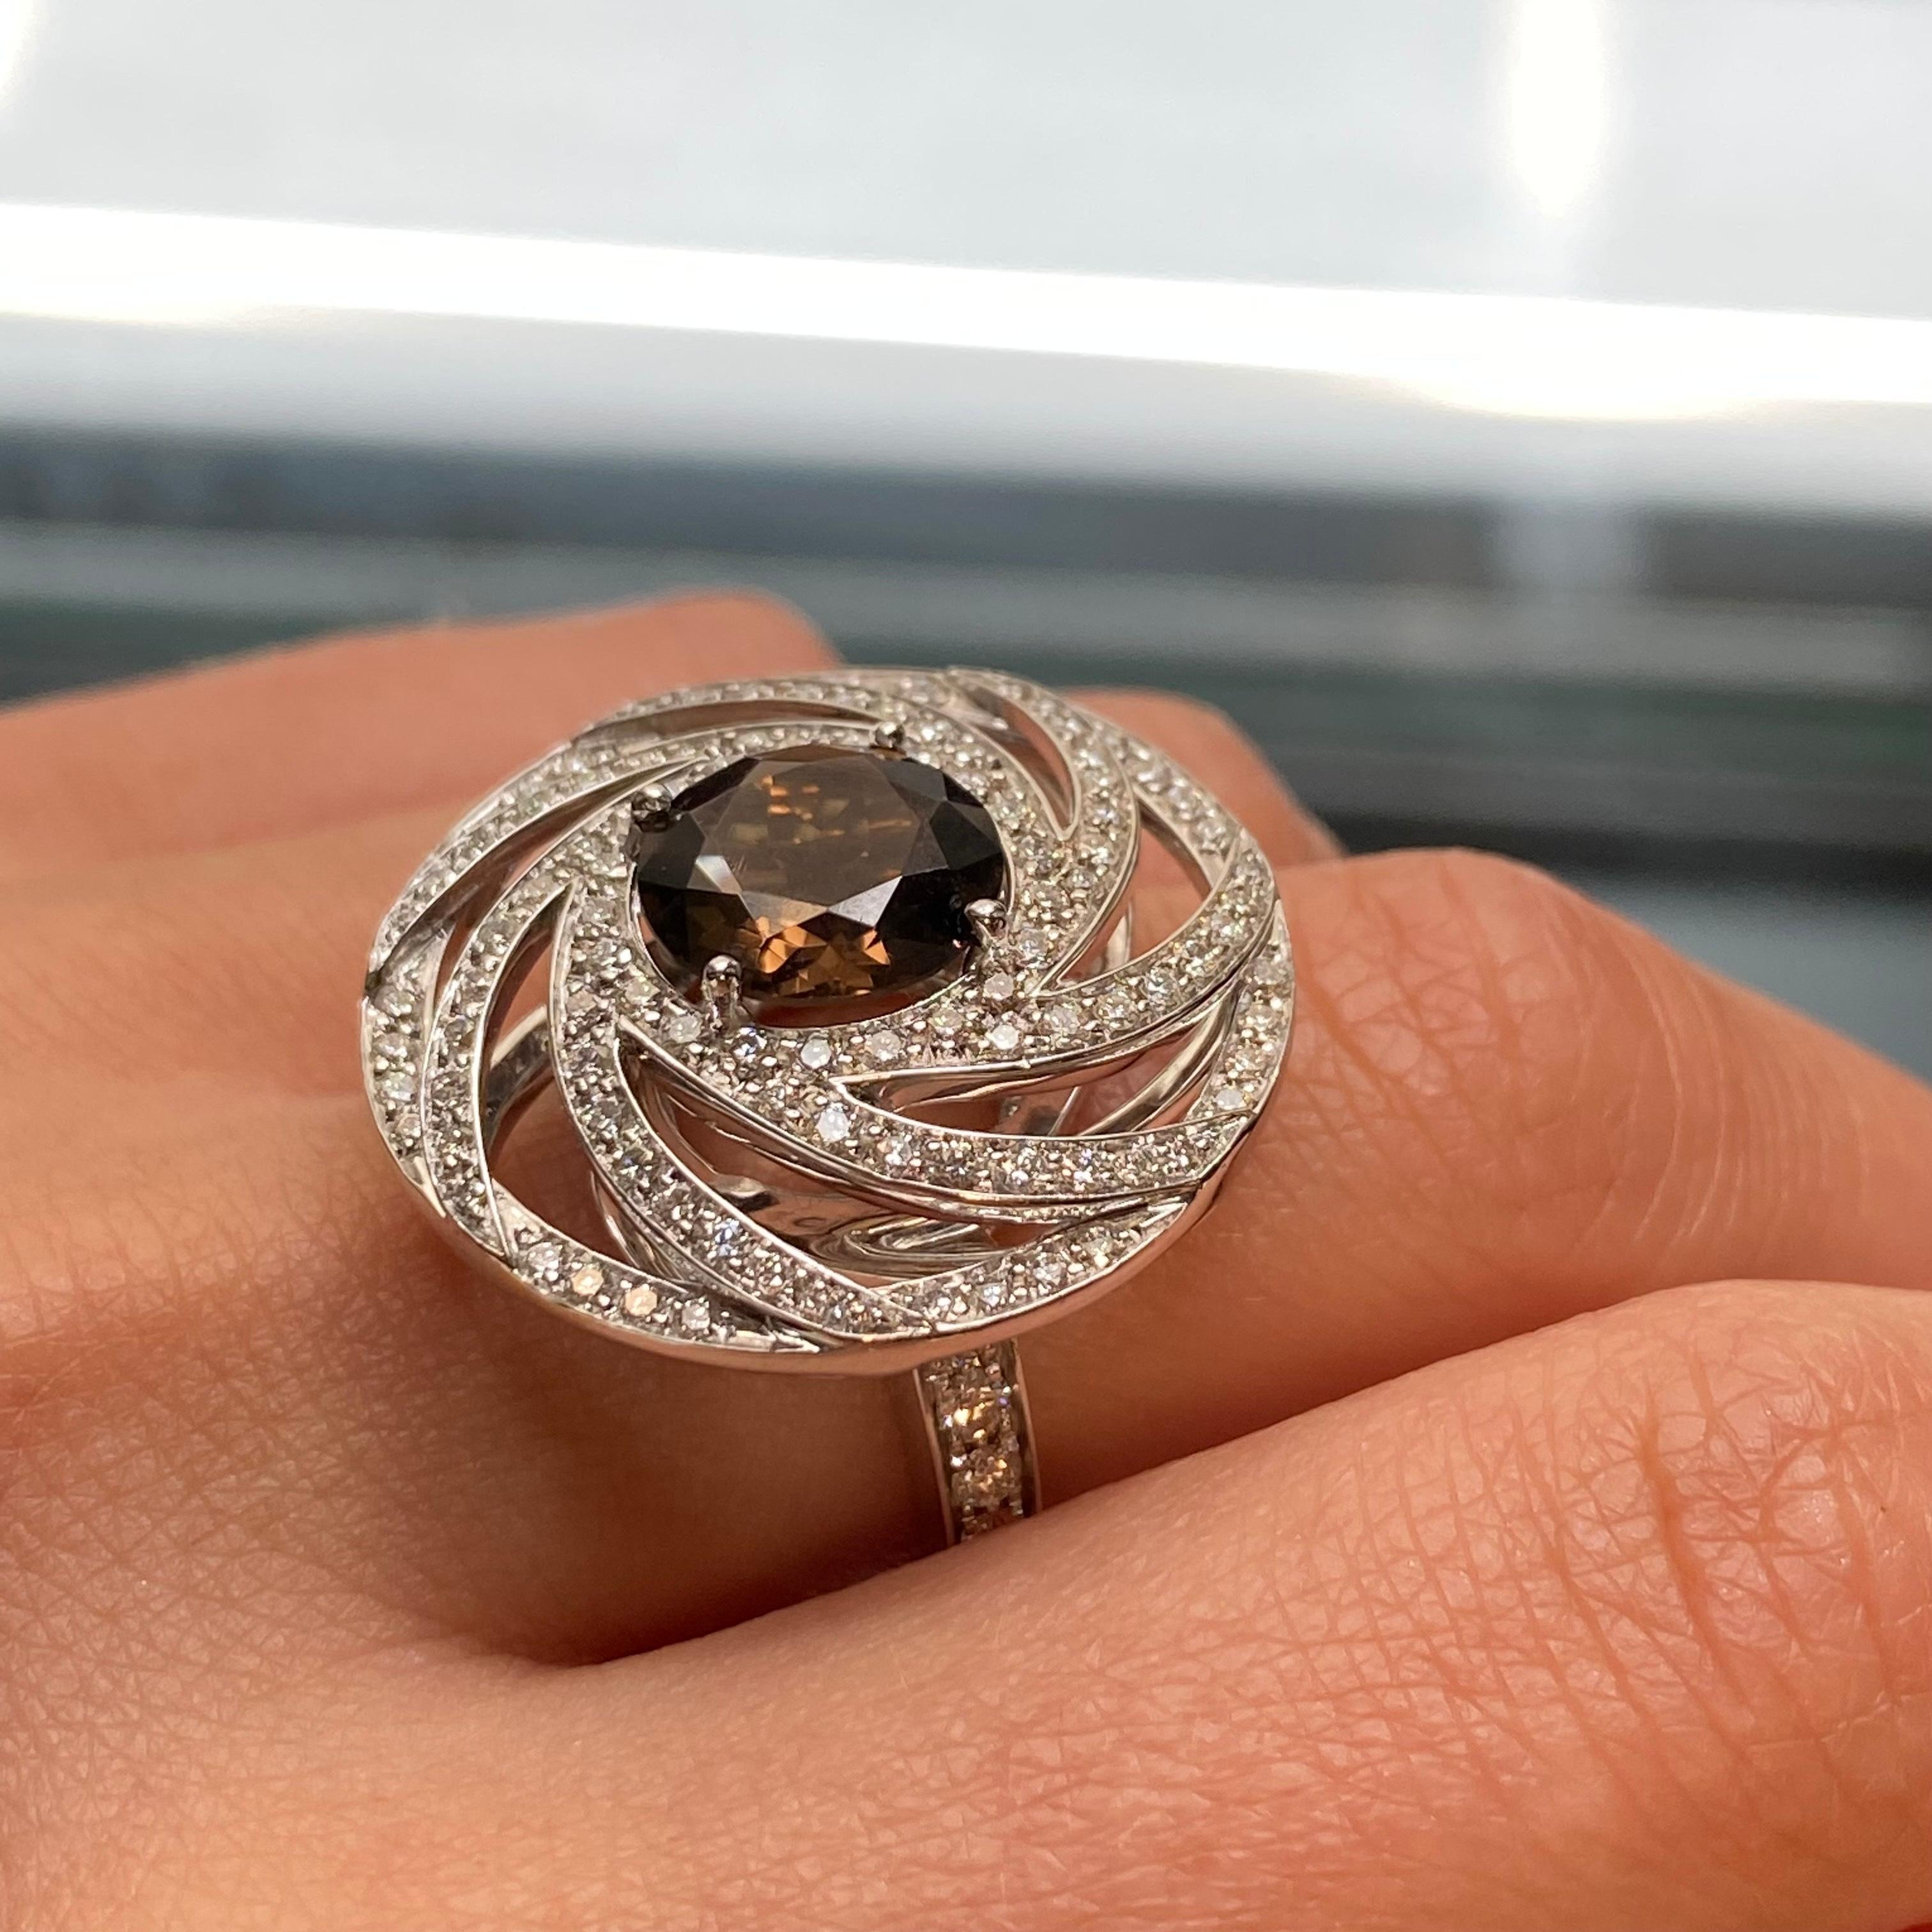 Luca Carati Smoky Quartz & Diamond Ring 18K White Gold 1.18 Cttw Size 7 In New Condition For Sale In New York, NY